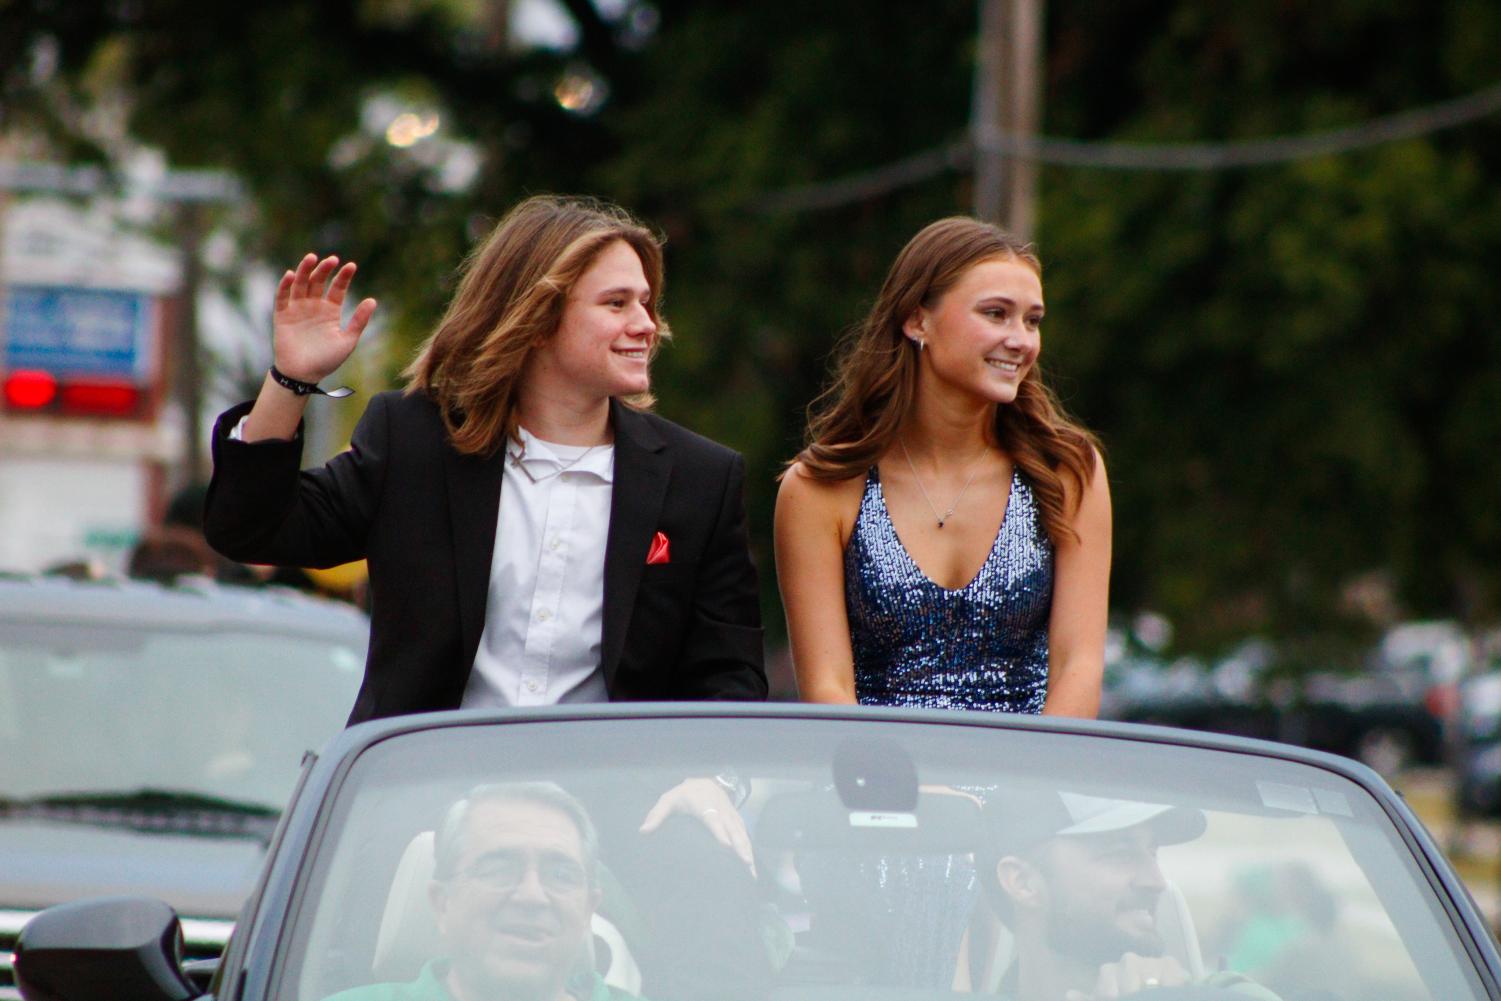 Homecoming+Parade+2022+%28Photos+by+Joselyn+Steele%29